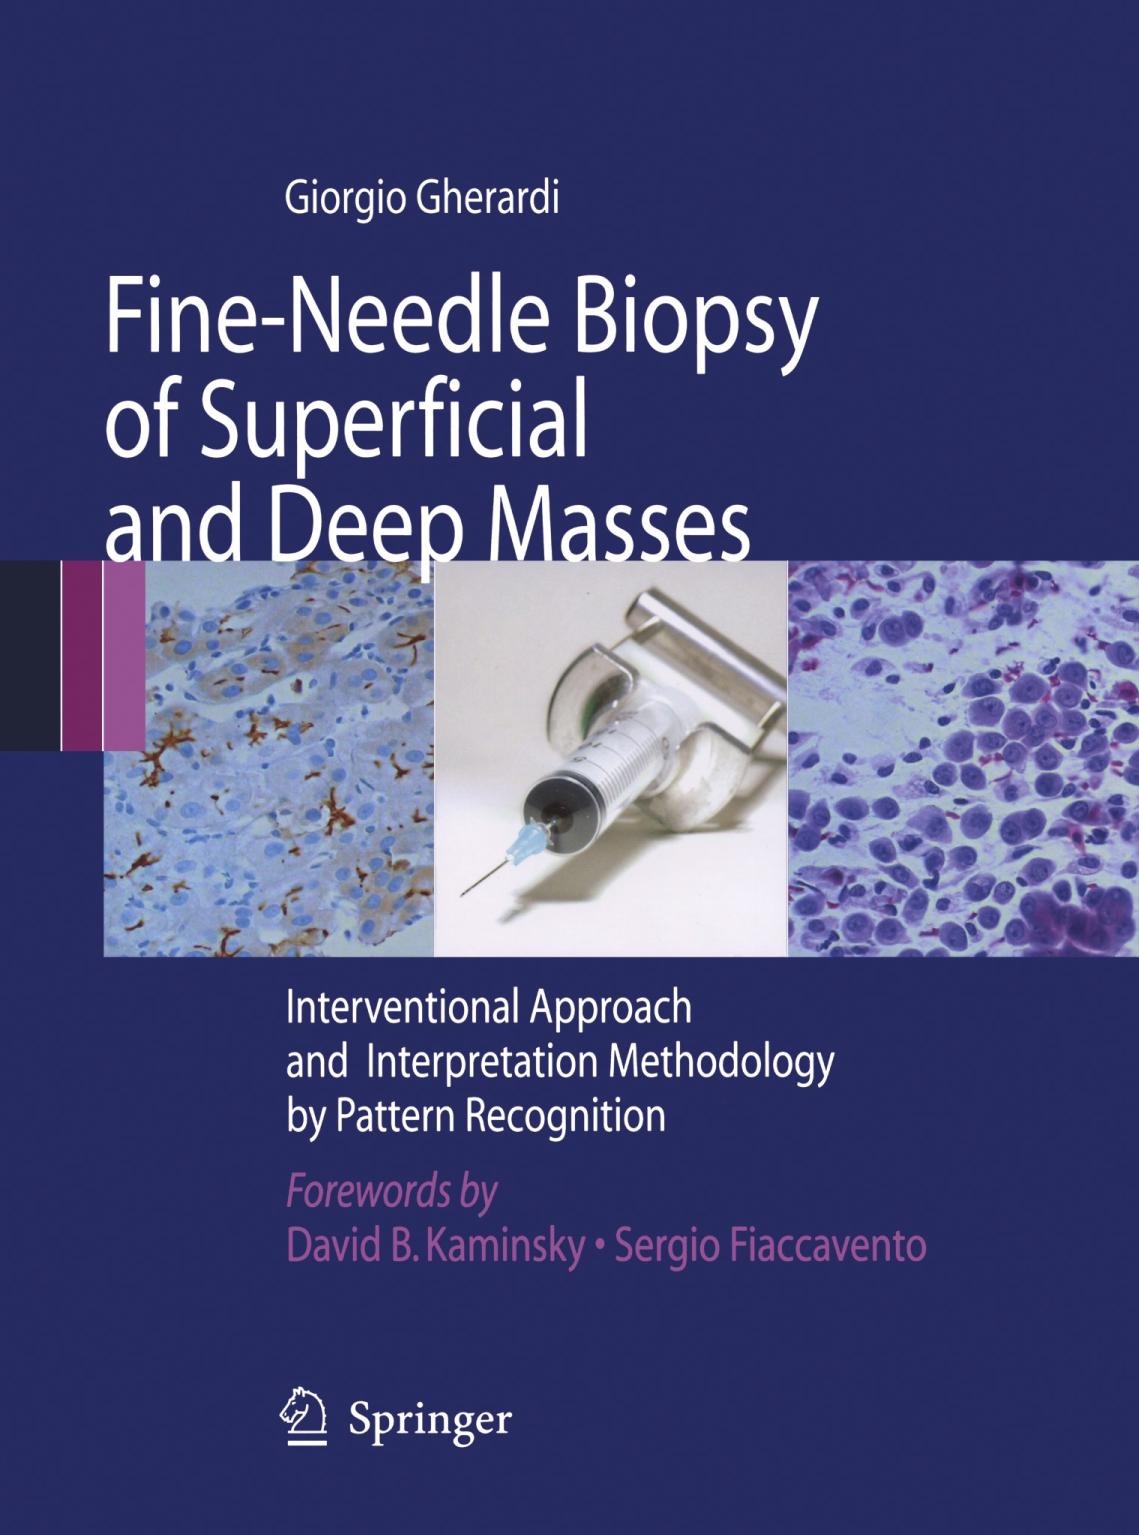 Fineneedle Biopsy of Superficial and Deep Masses